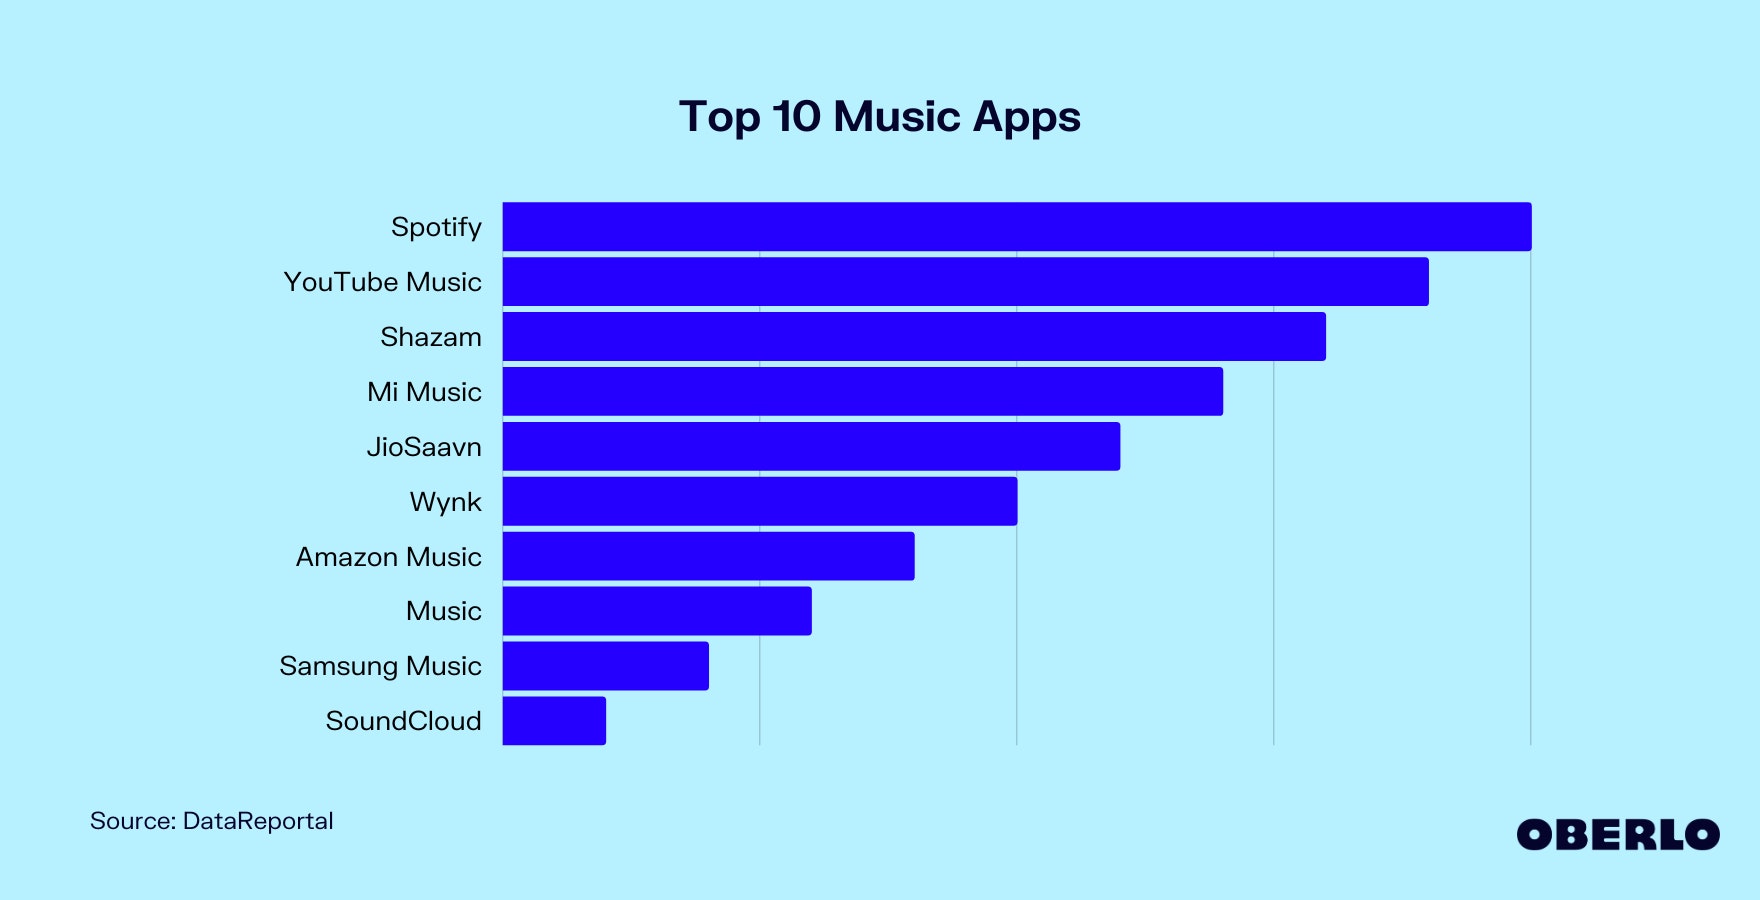 Chart ranking the top 10 music apps